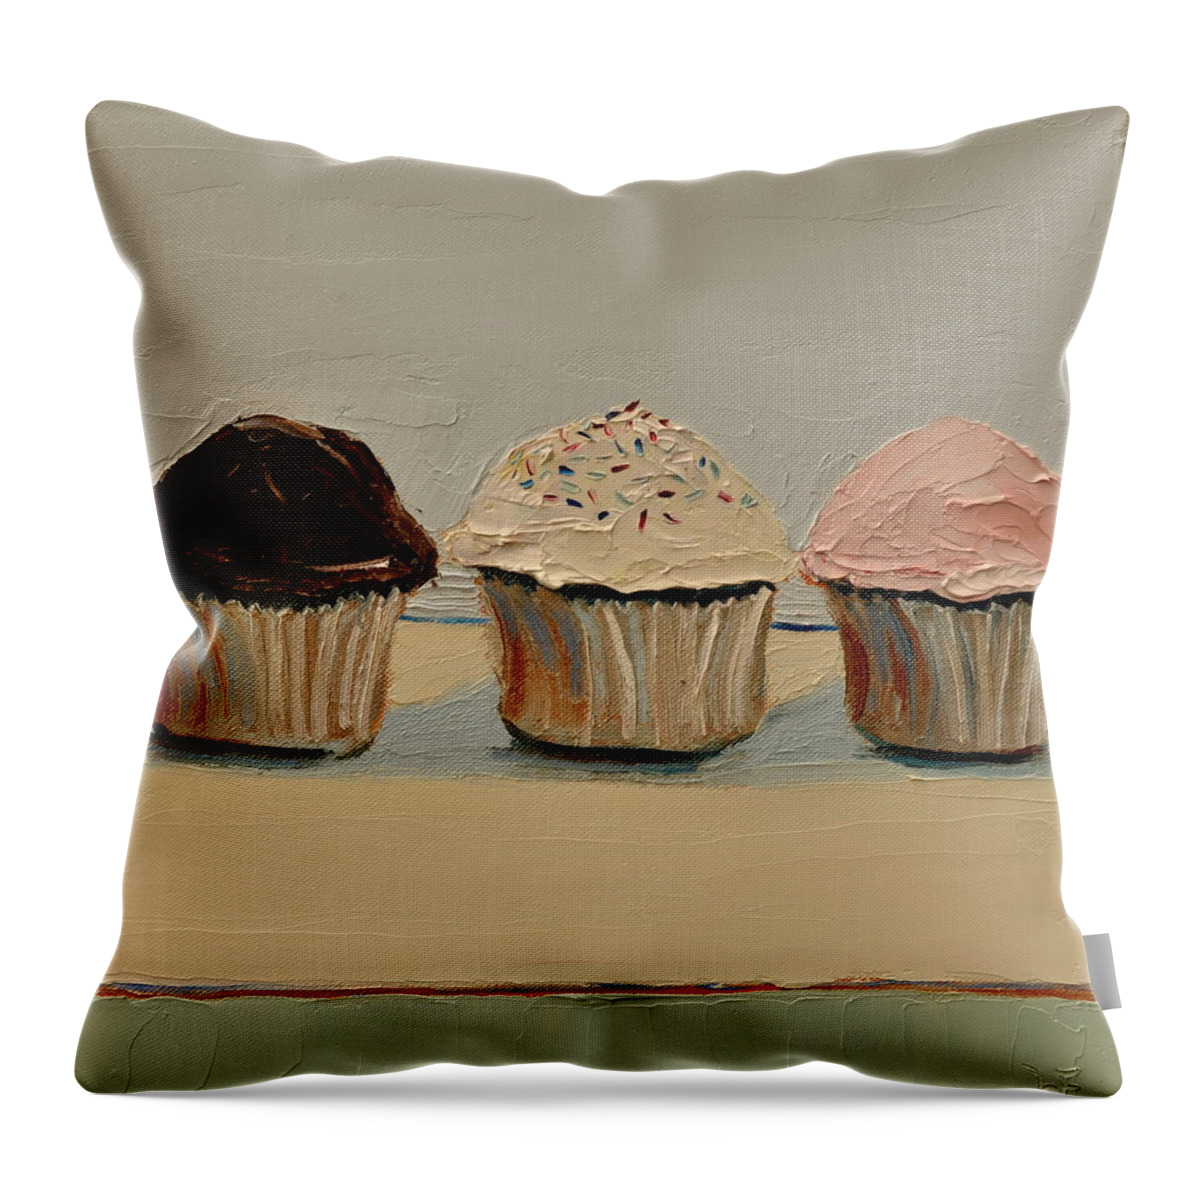 Cupcake Throw Pillow featuring the painting Cupcake by Lindsay Frost